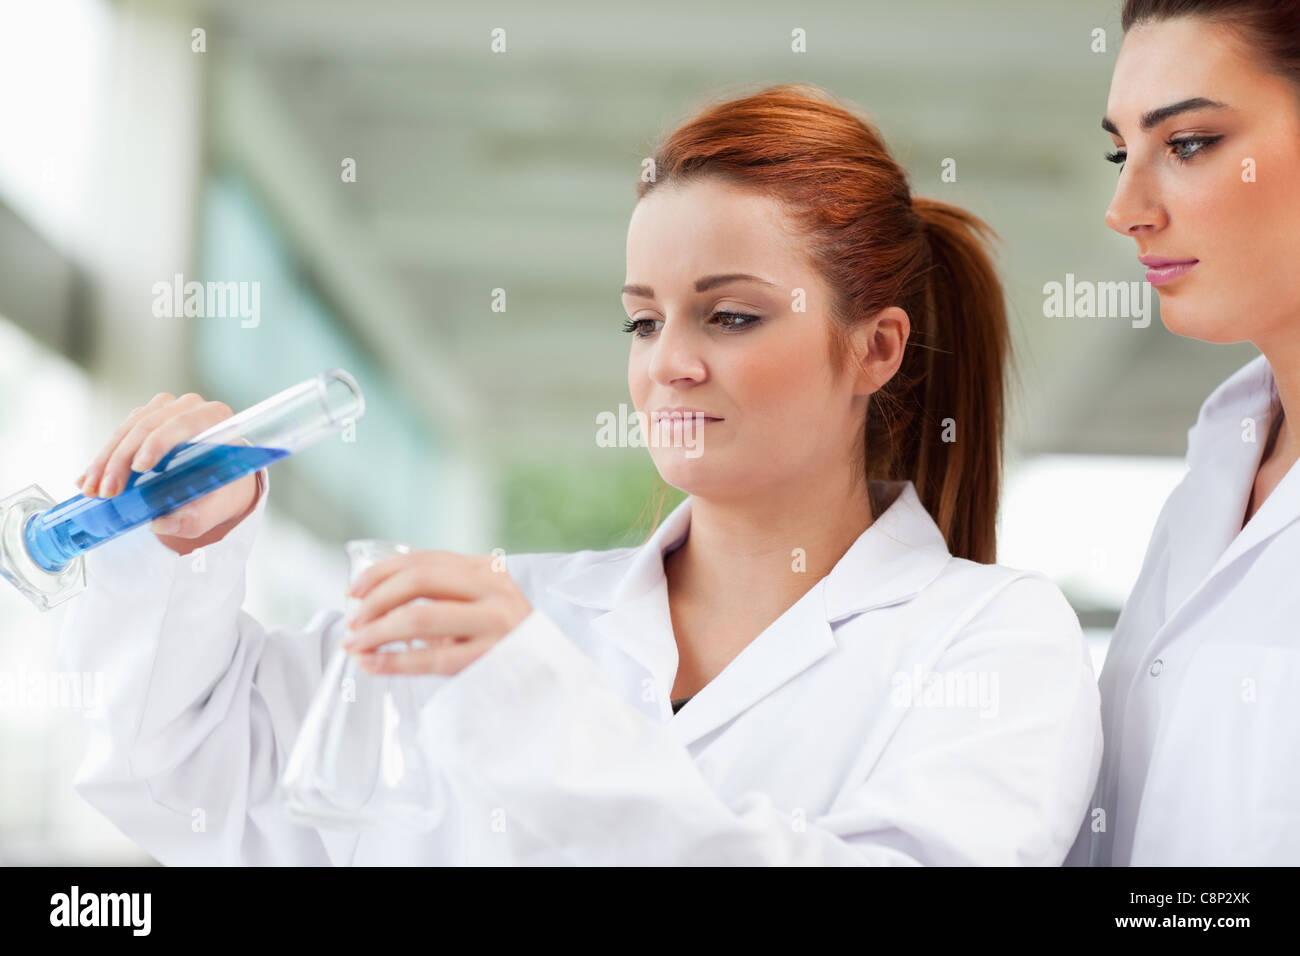 Scientists pouring liquid in an Erlenmeyer flask Stock Photo